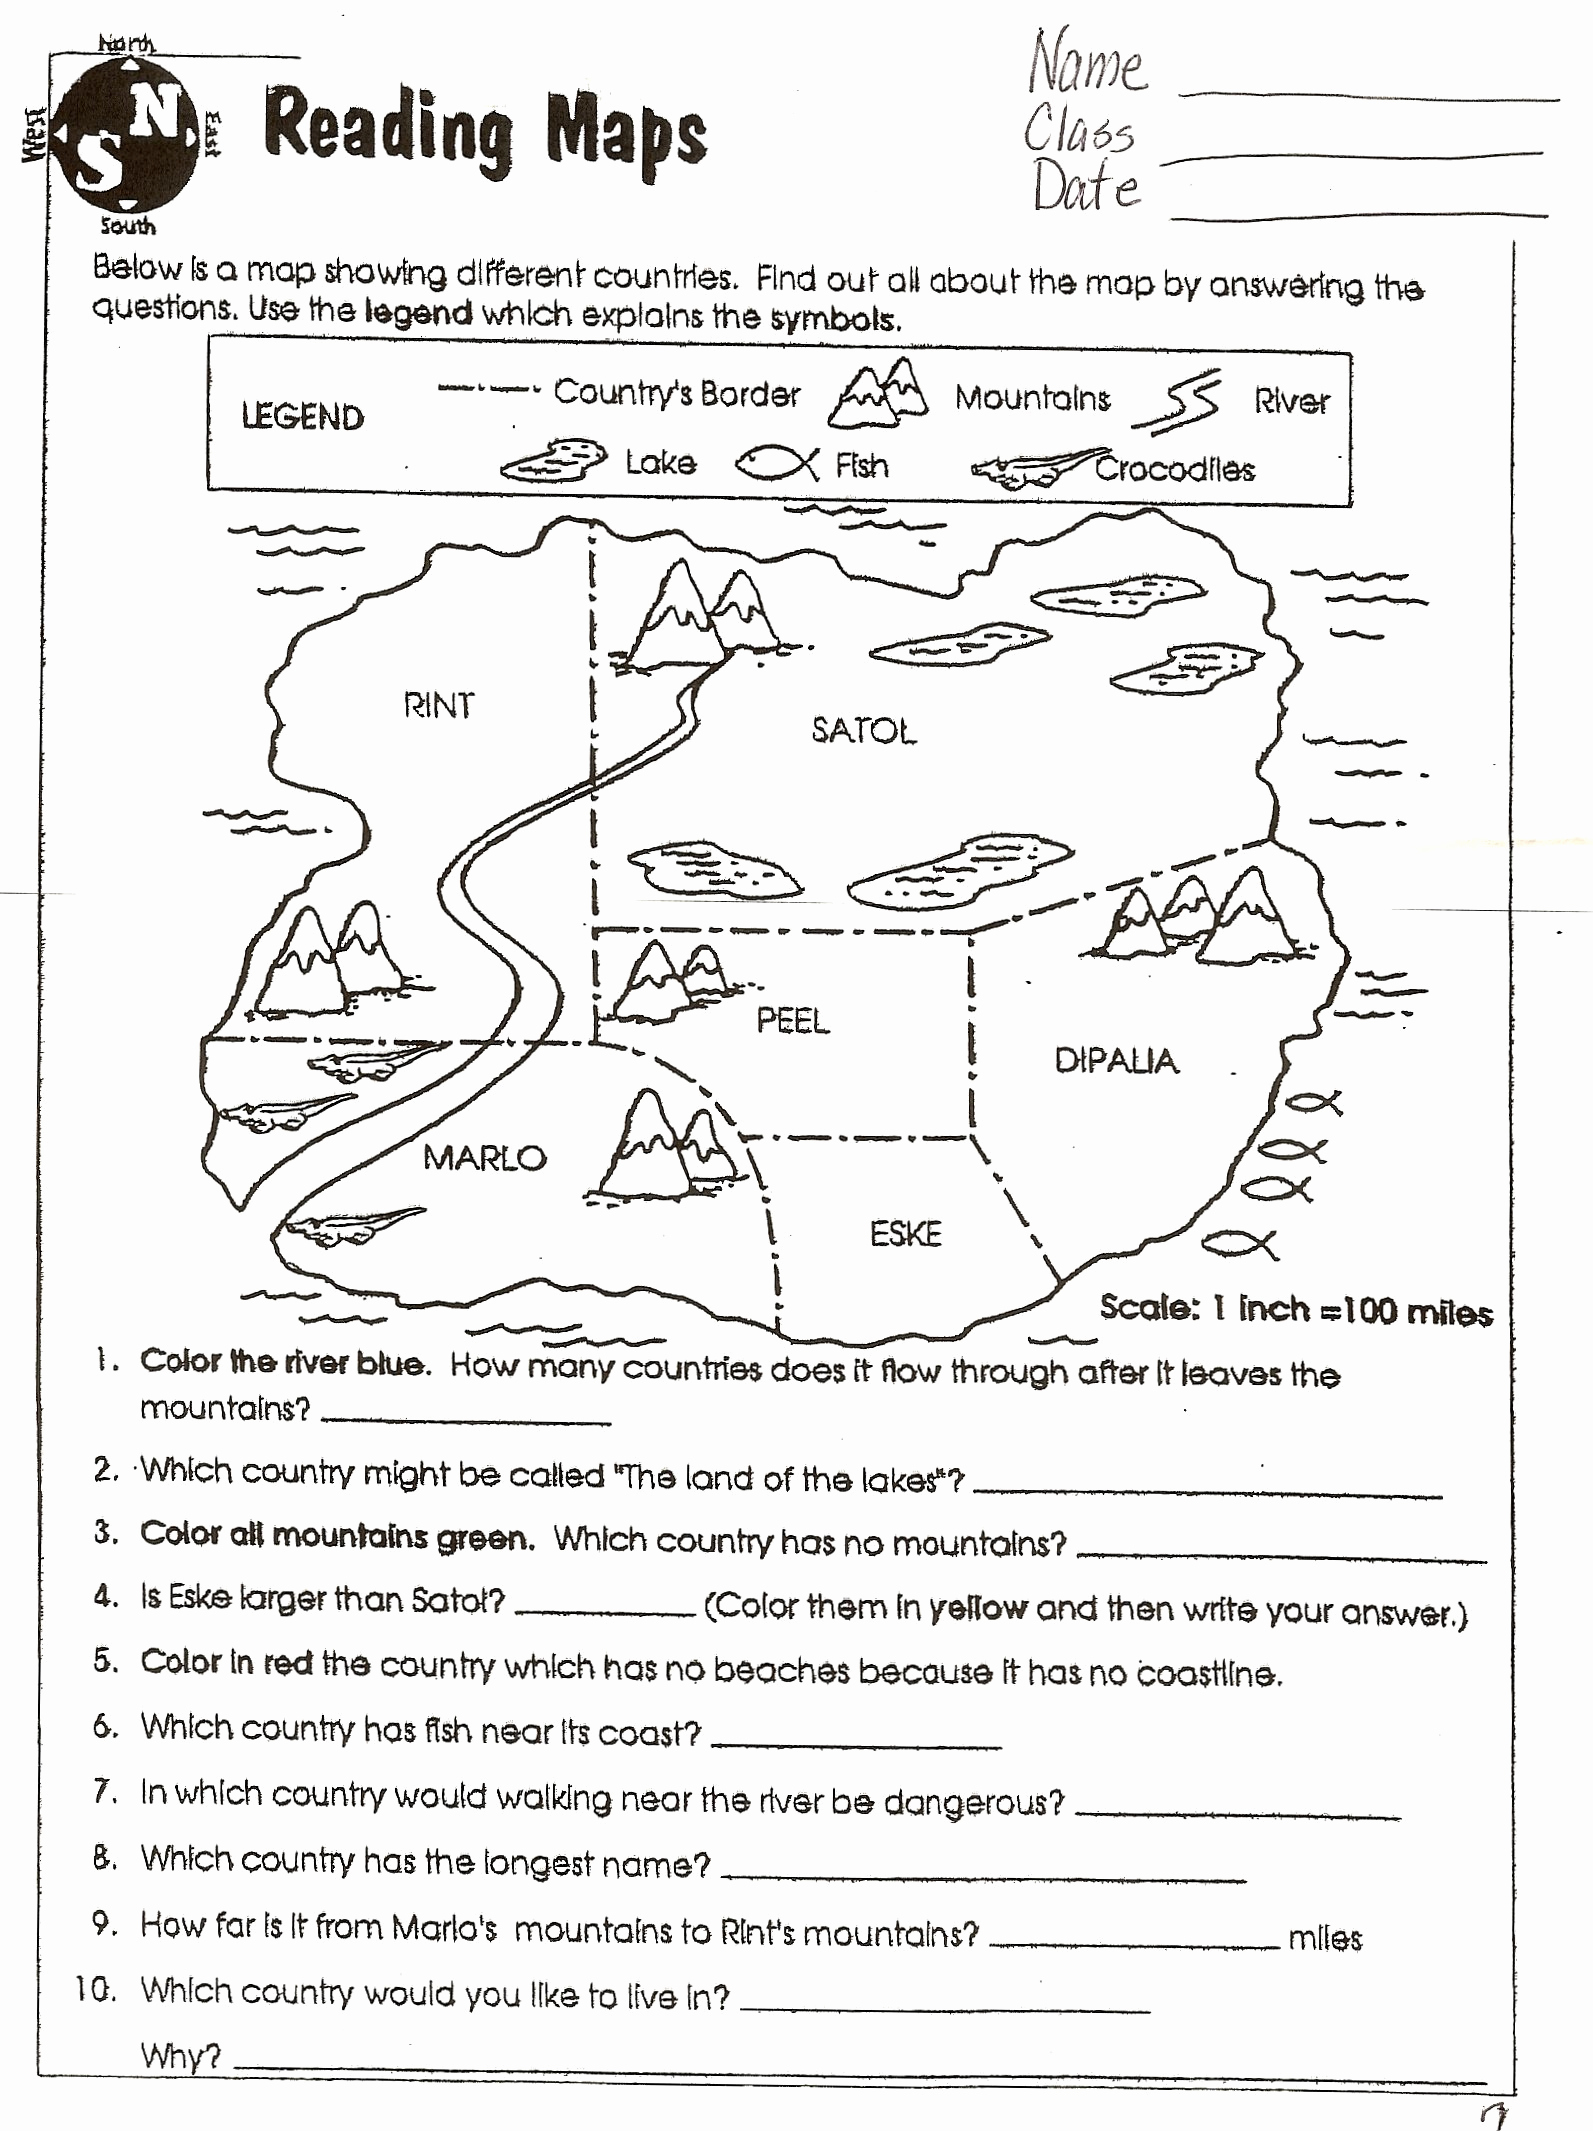 Physical and Political Maps Worksheets Inspirational 20 Physical and Political Maps Worksheets Suryadi